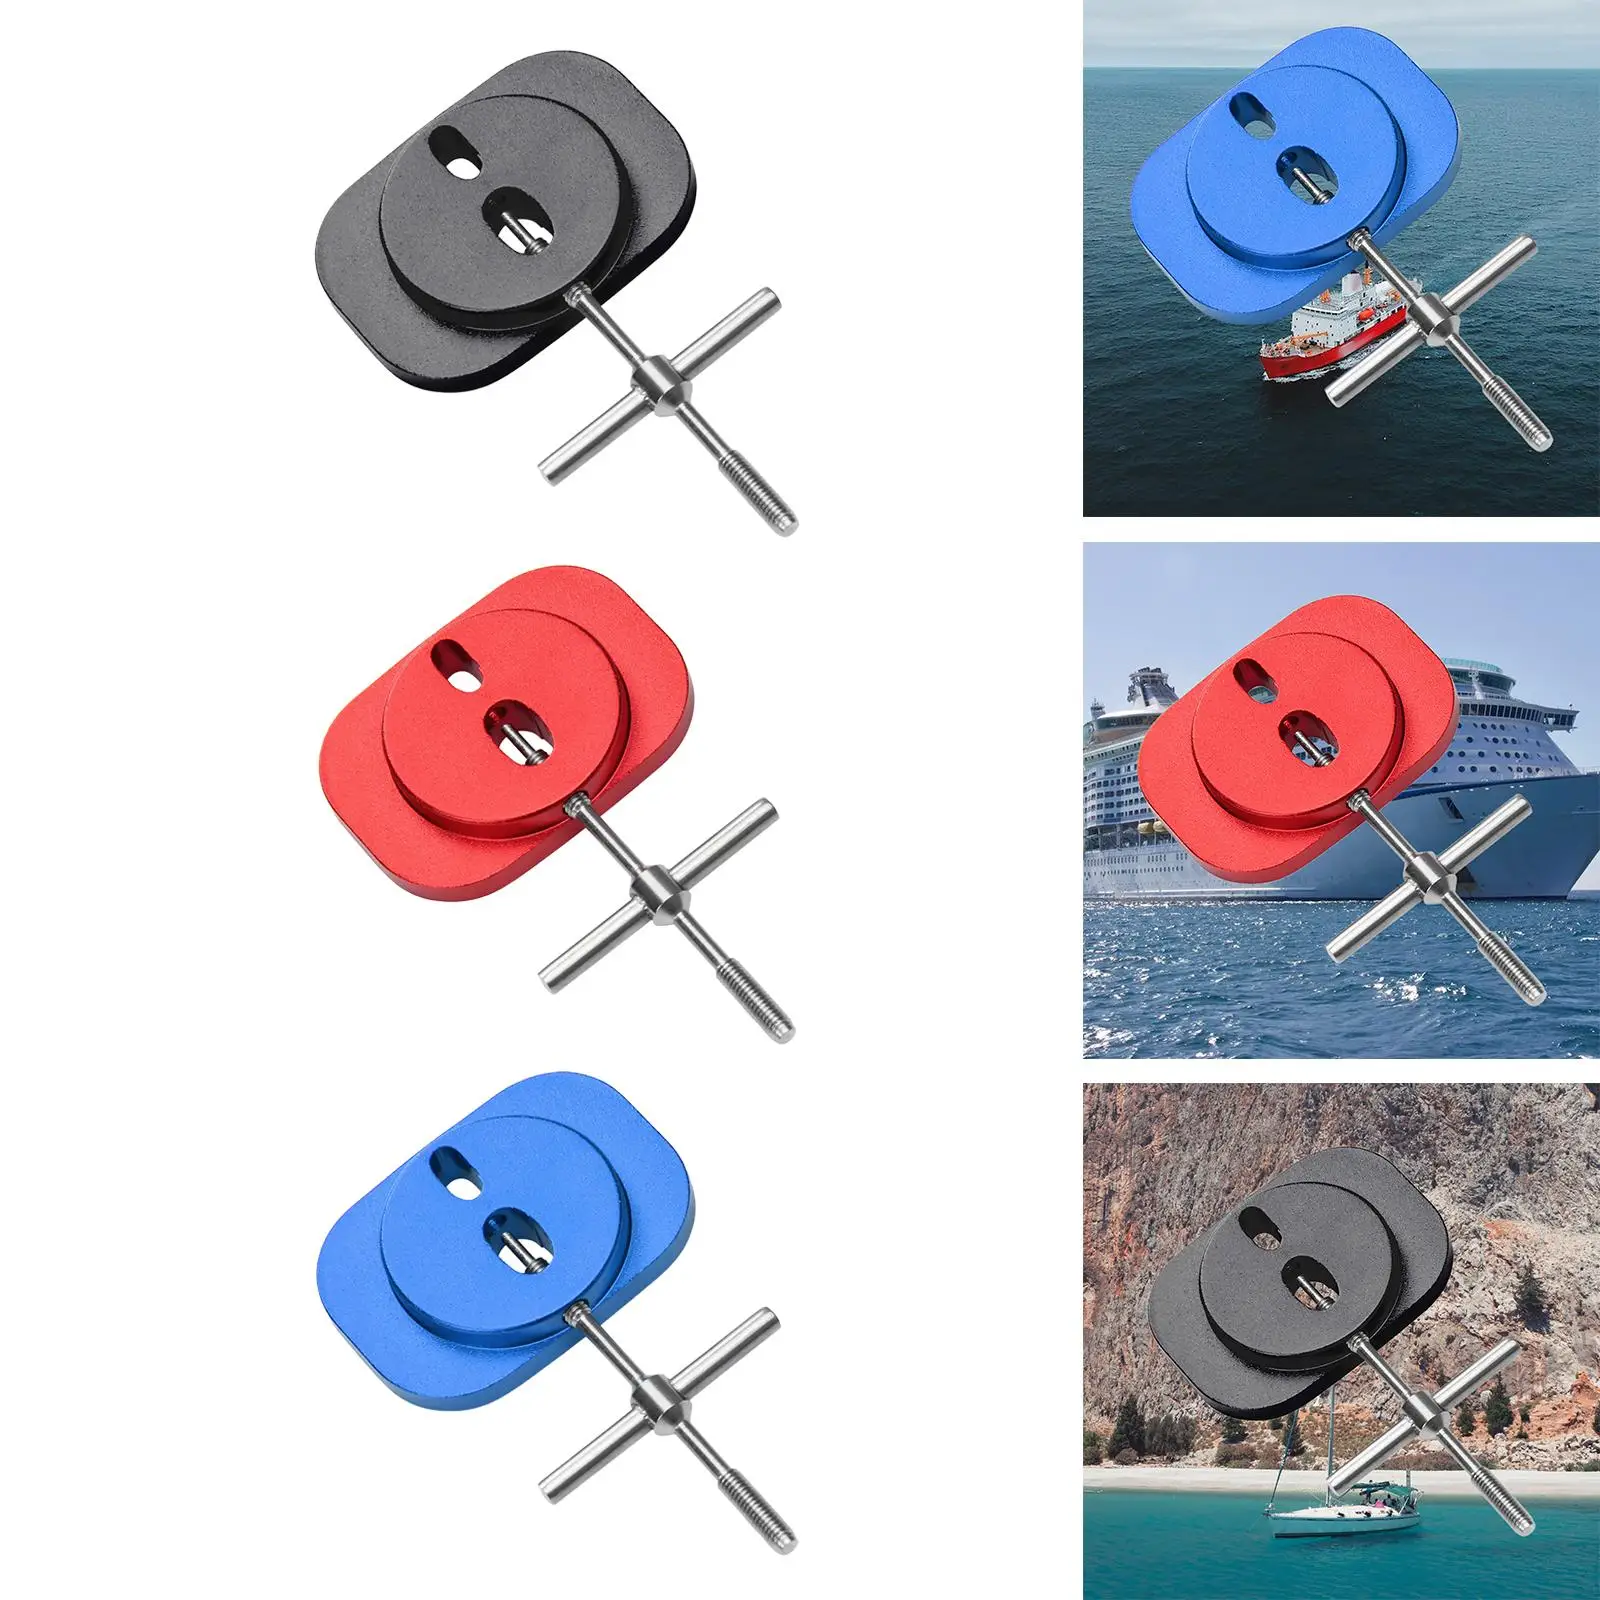 Handheld Fishing Reel Removal Toolcasting Durable for DIY Modified Tool